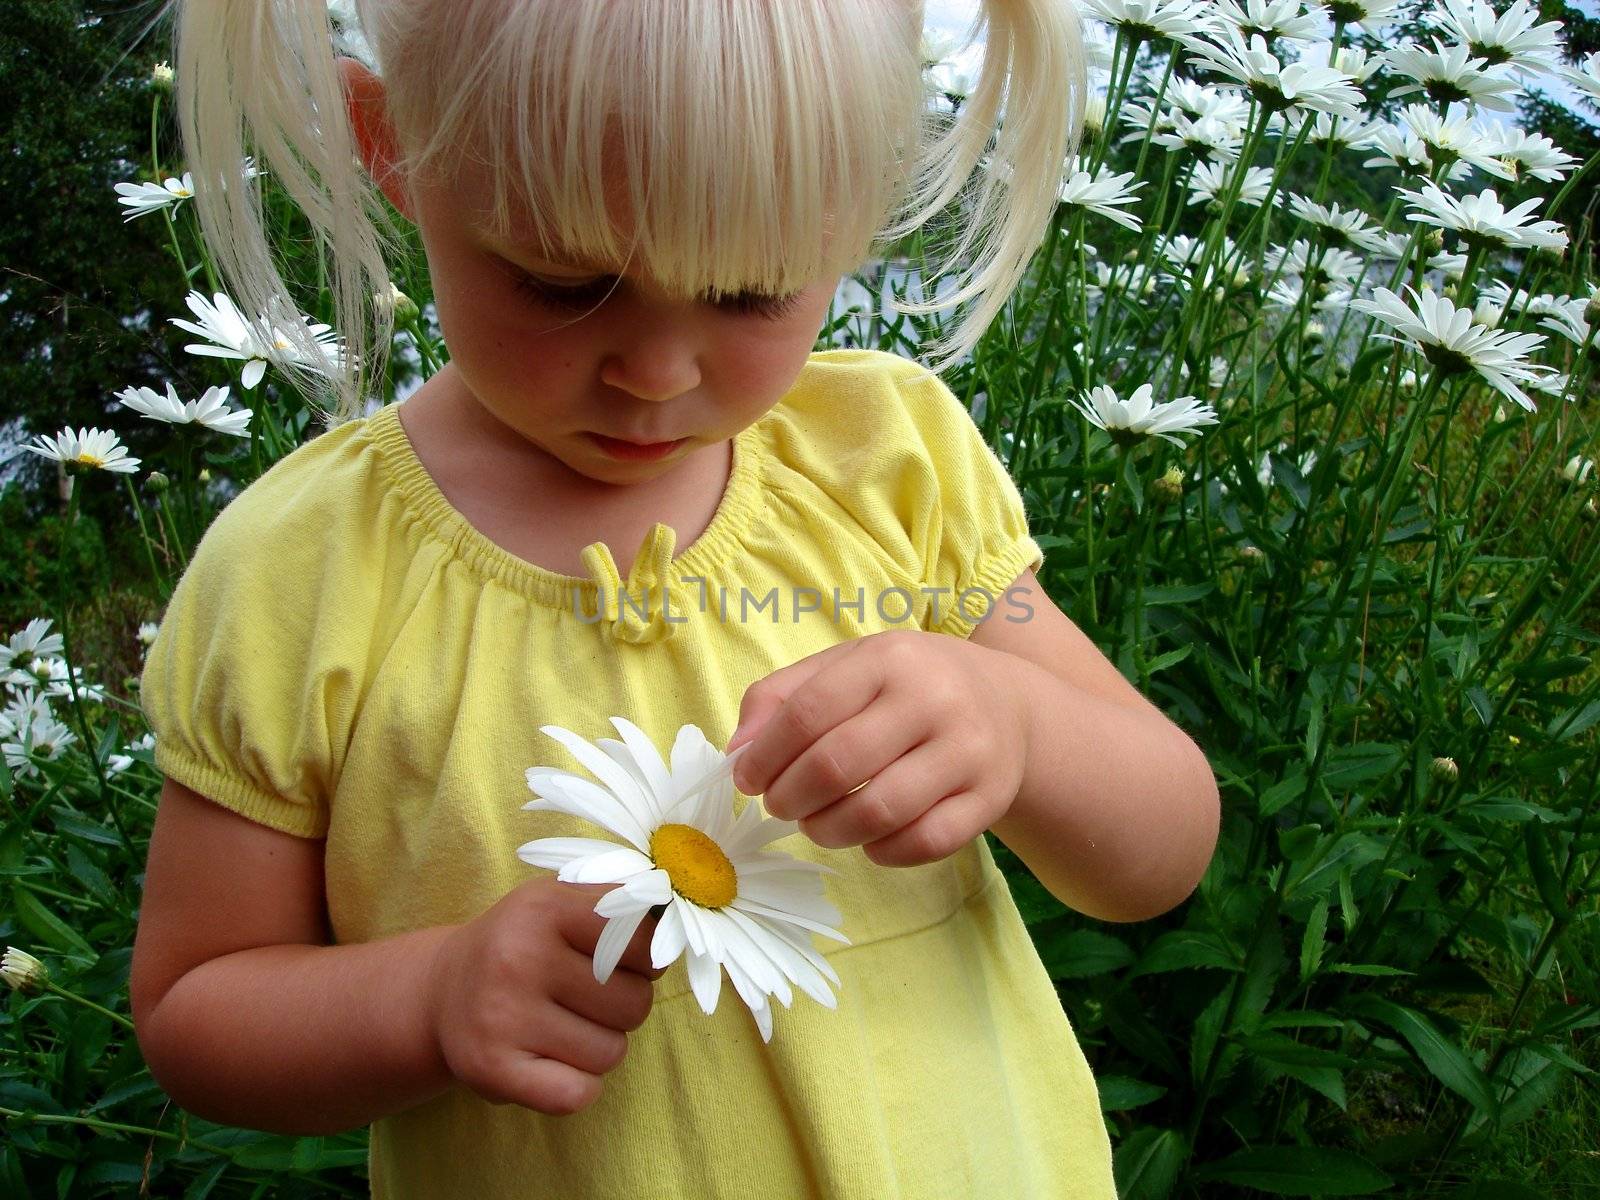 girl picking the flowers. Please note: No negative use allowed.